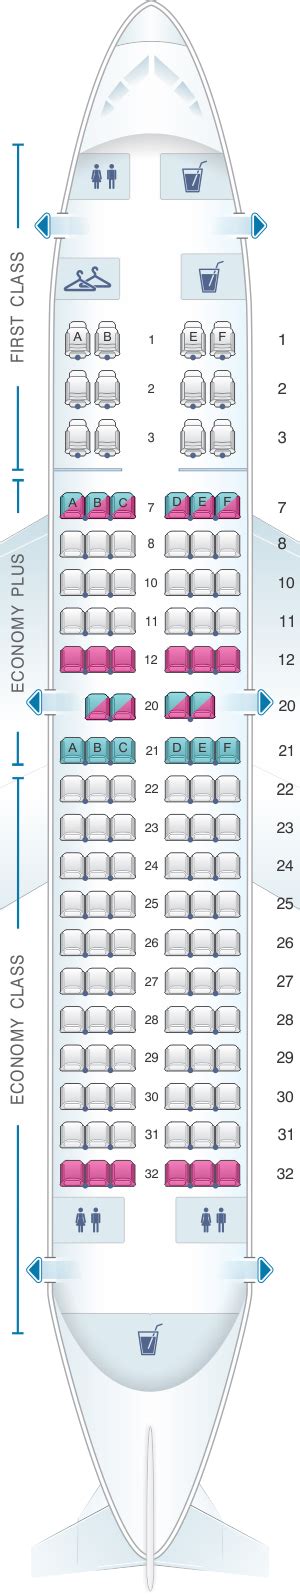 united boeing 737 700 seating chart